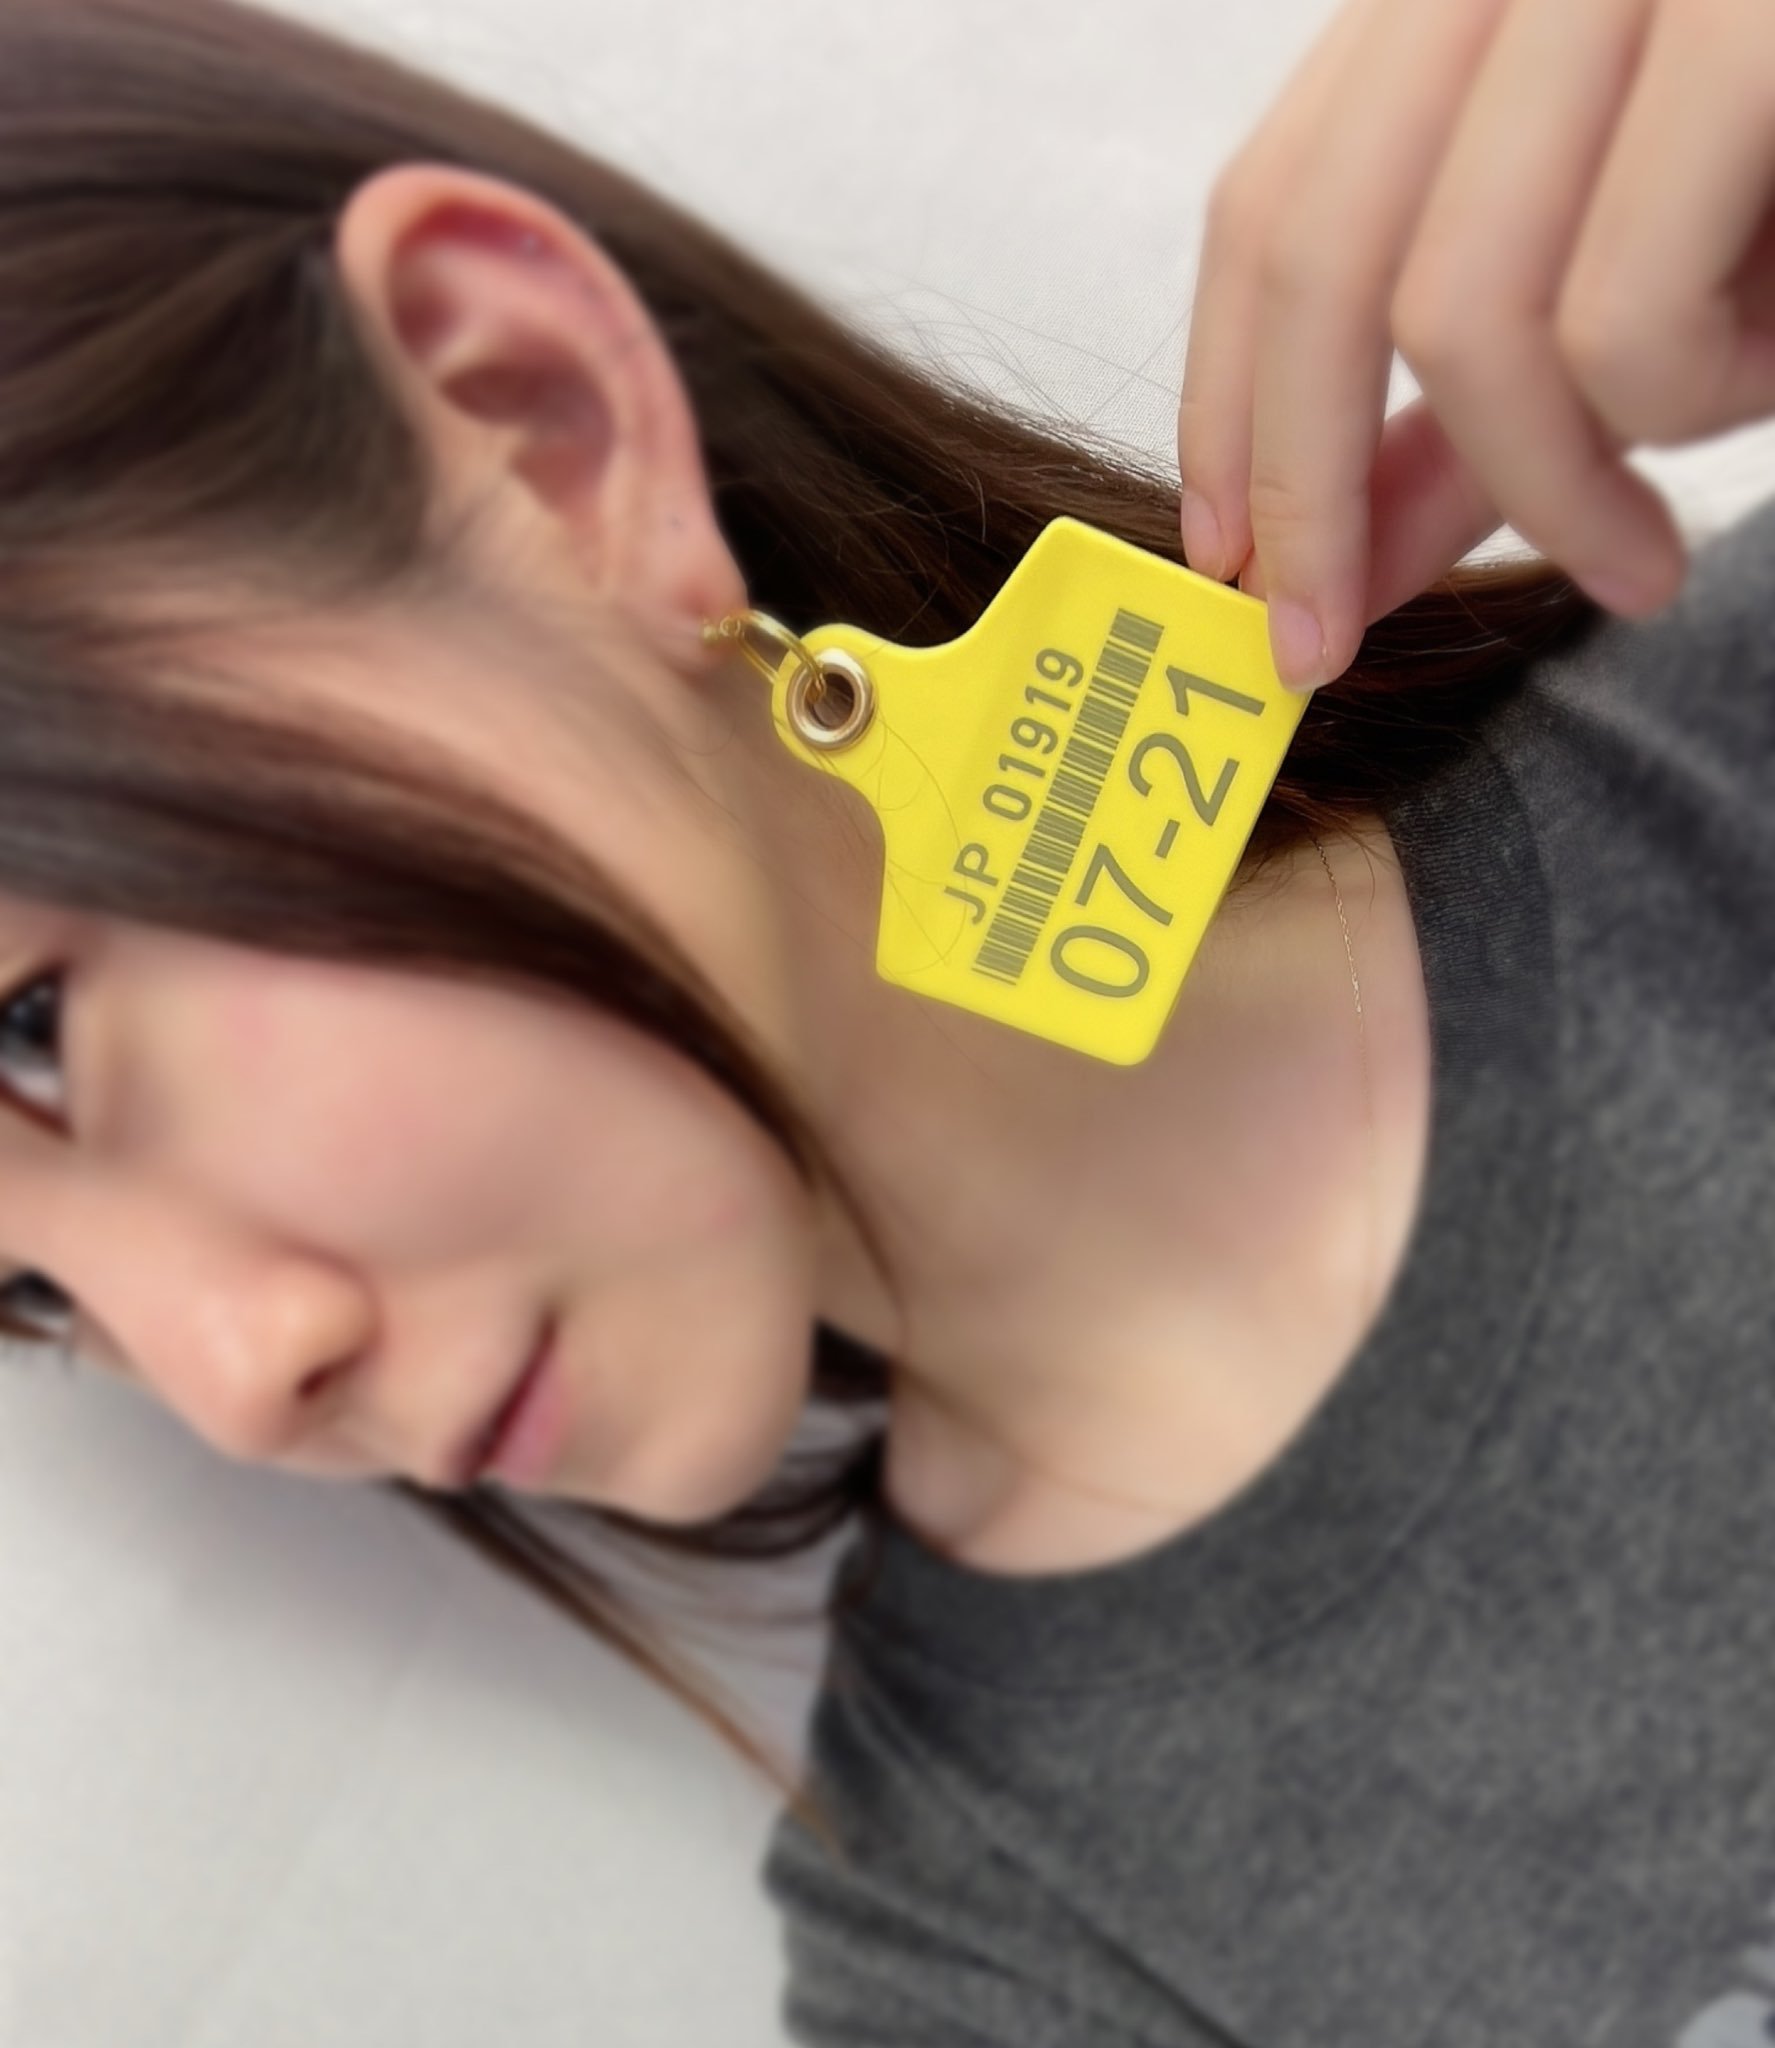 New Product from Vtuber Amane Sopra is a Cow Earring